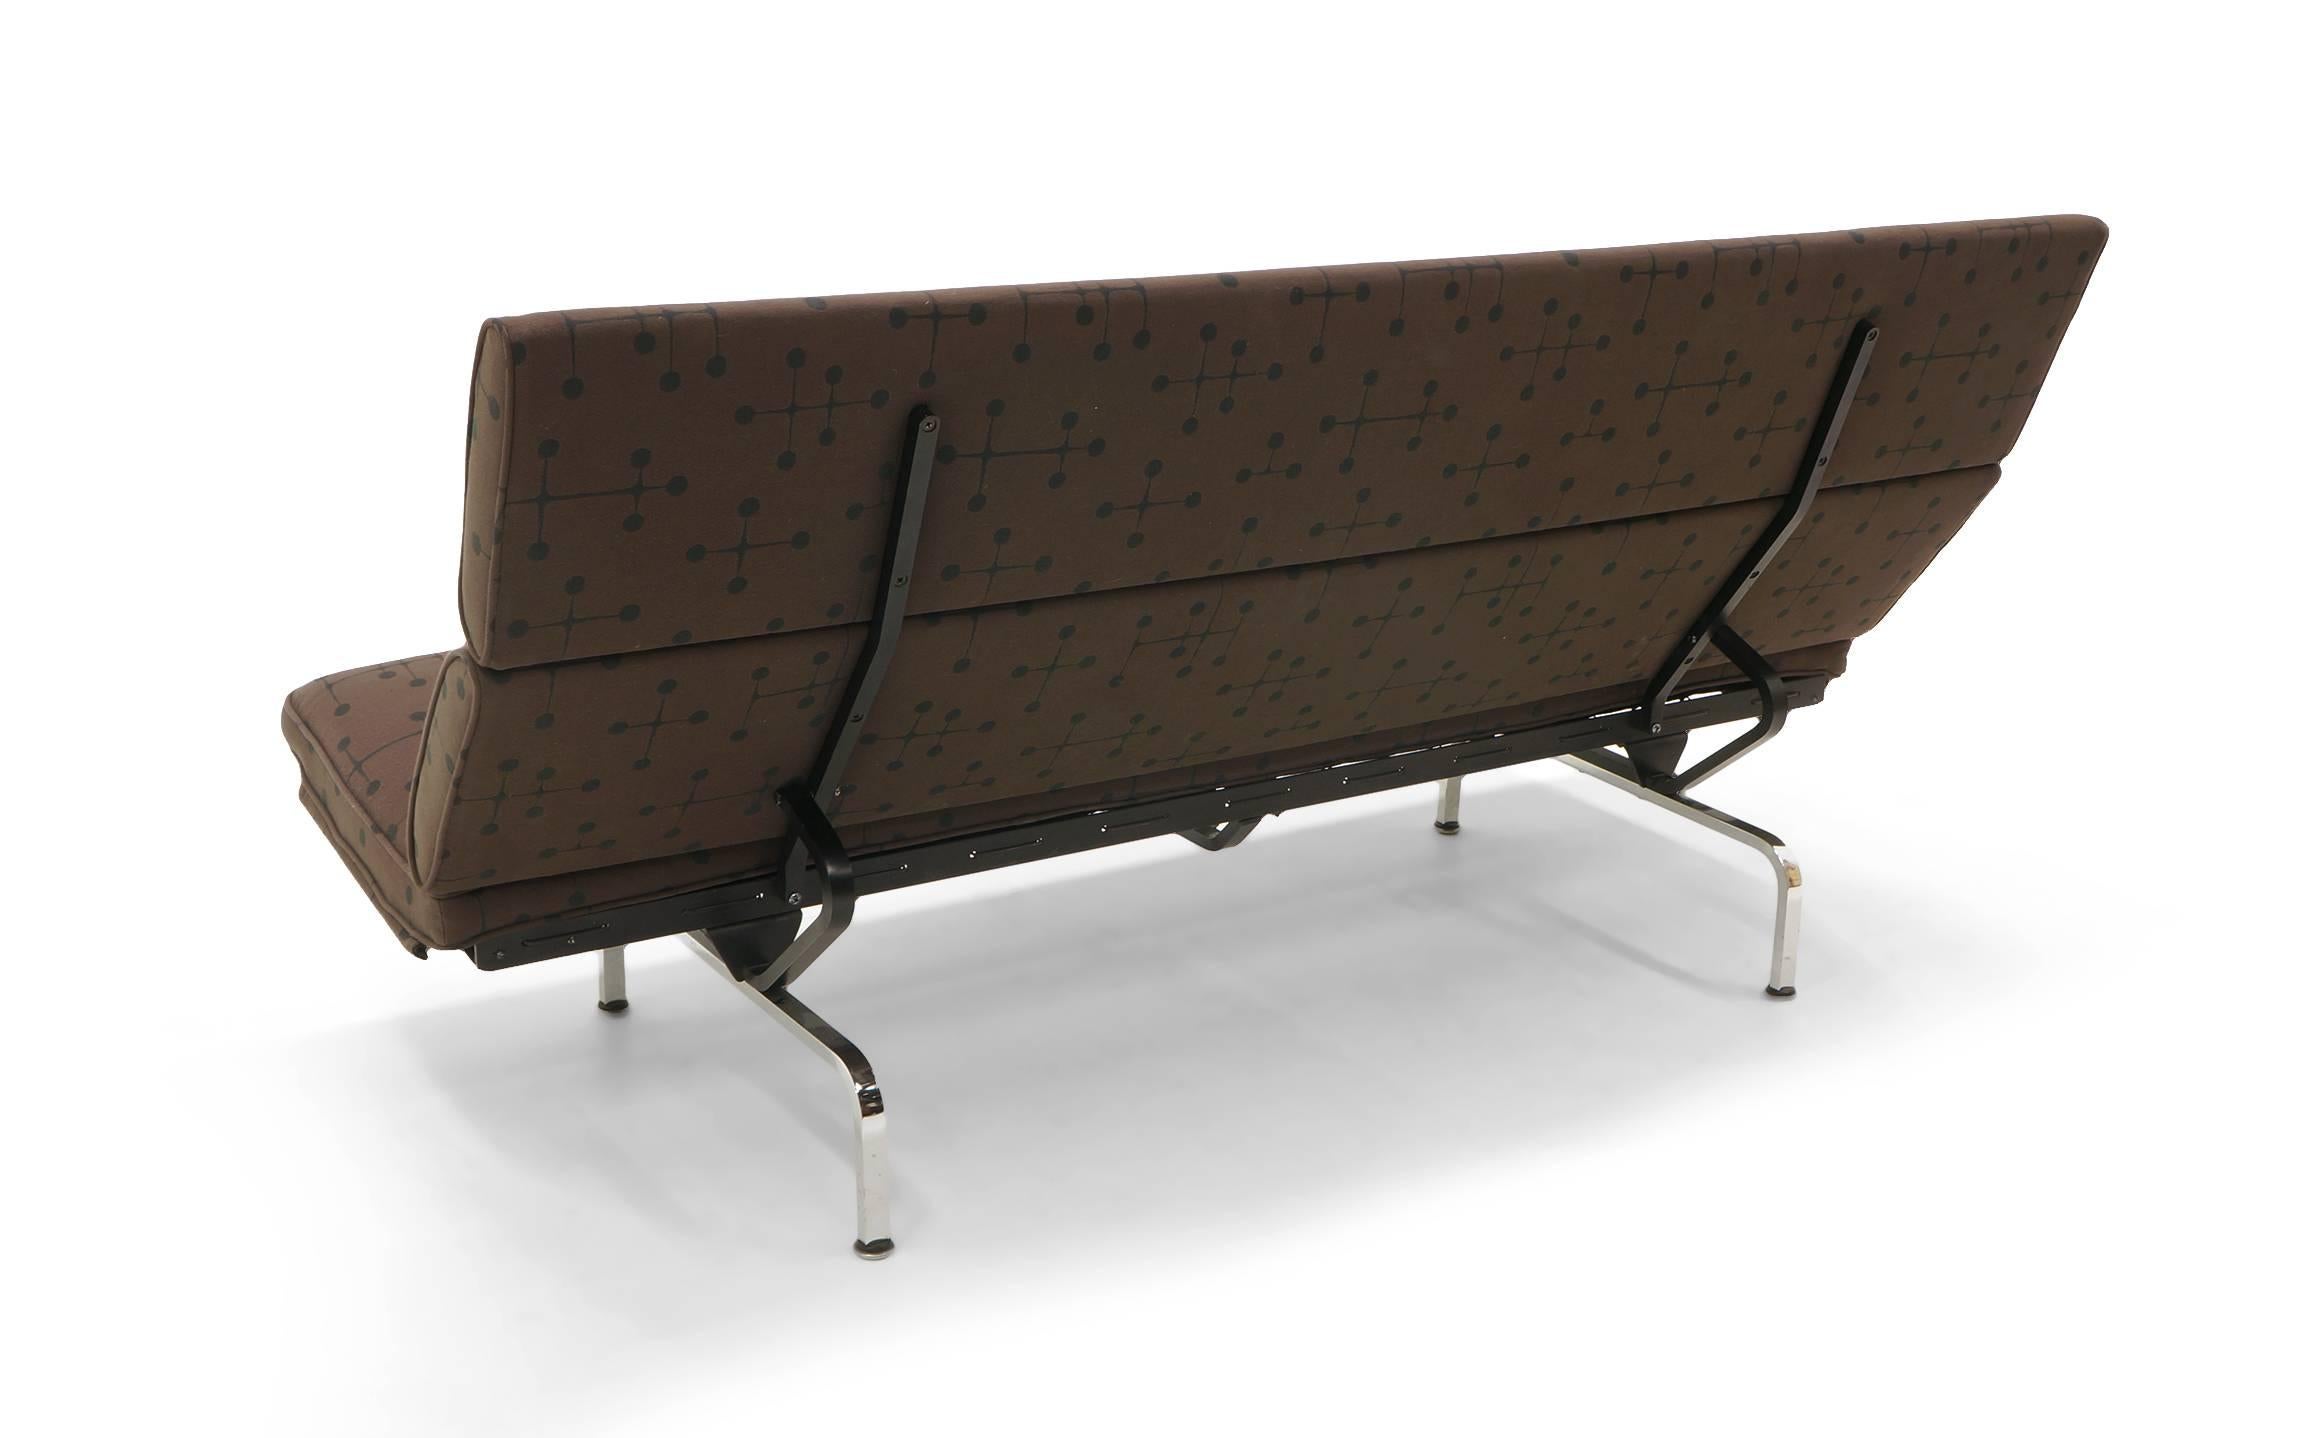 Mid-Century Modern Charles and Ray Eames Sofa Compact for Herman Miller in Eames Dot Pattern Fabric